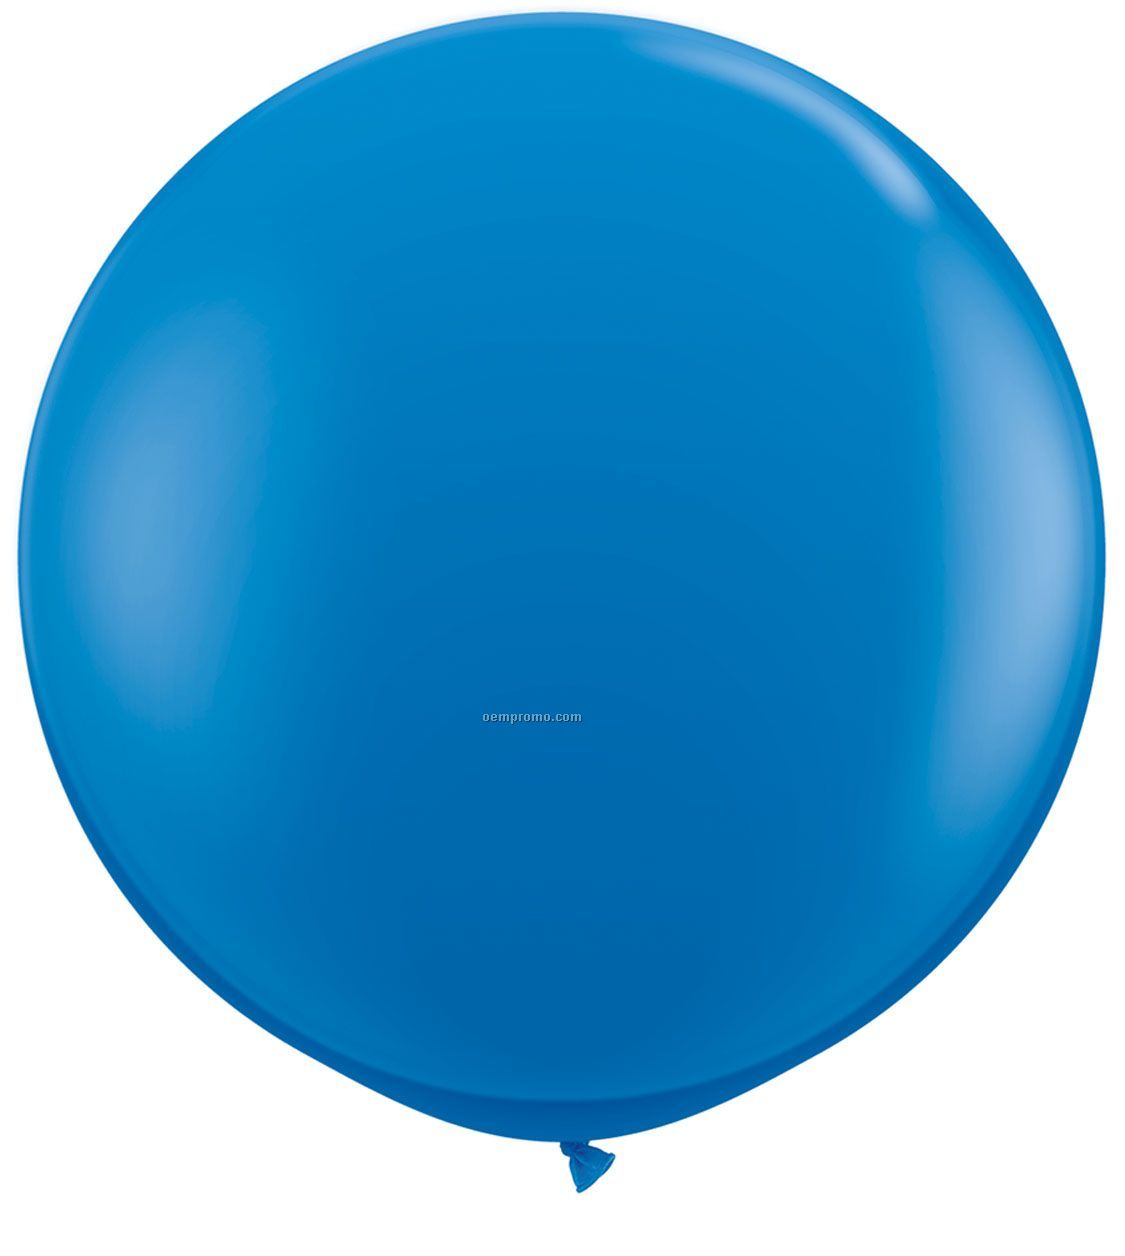 36" Giant Round Latex Balloon - Standard Color - Blank